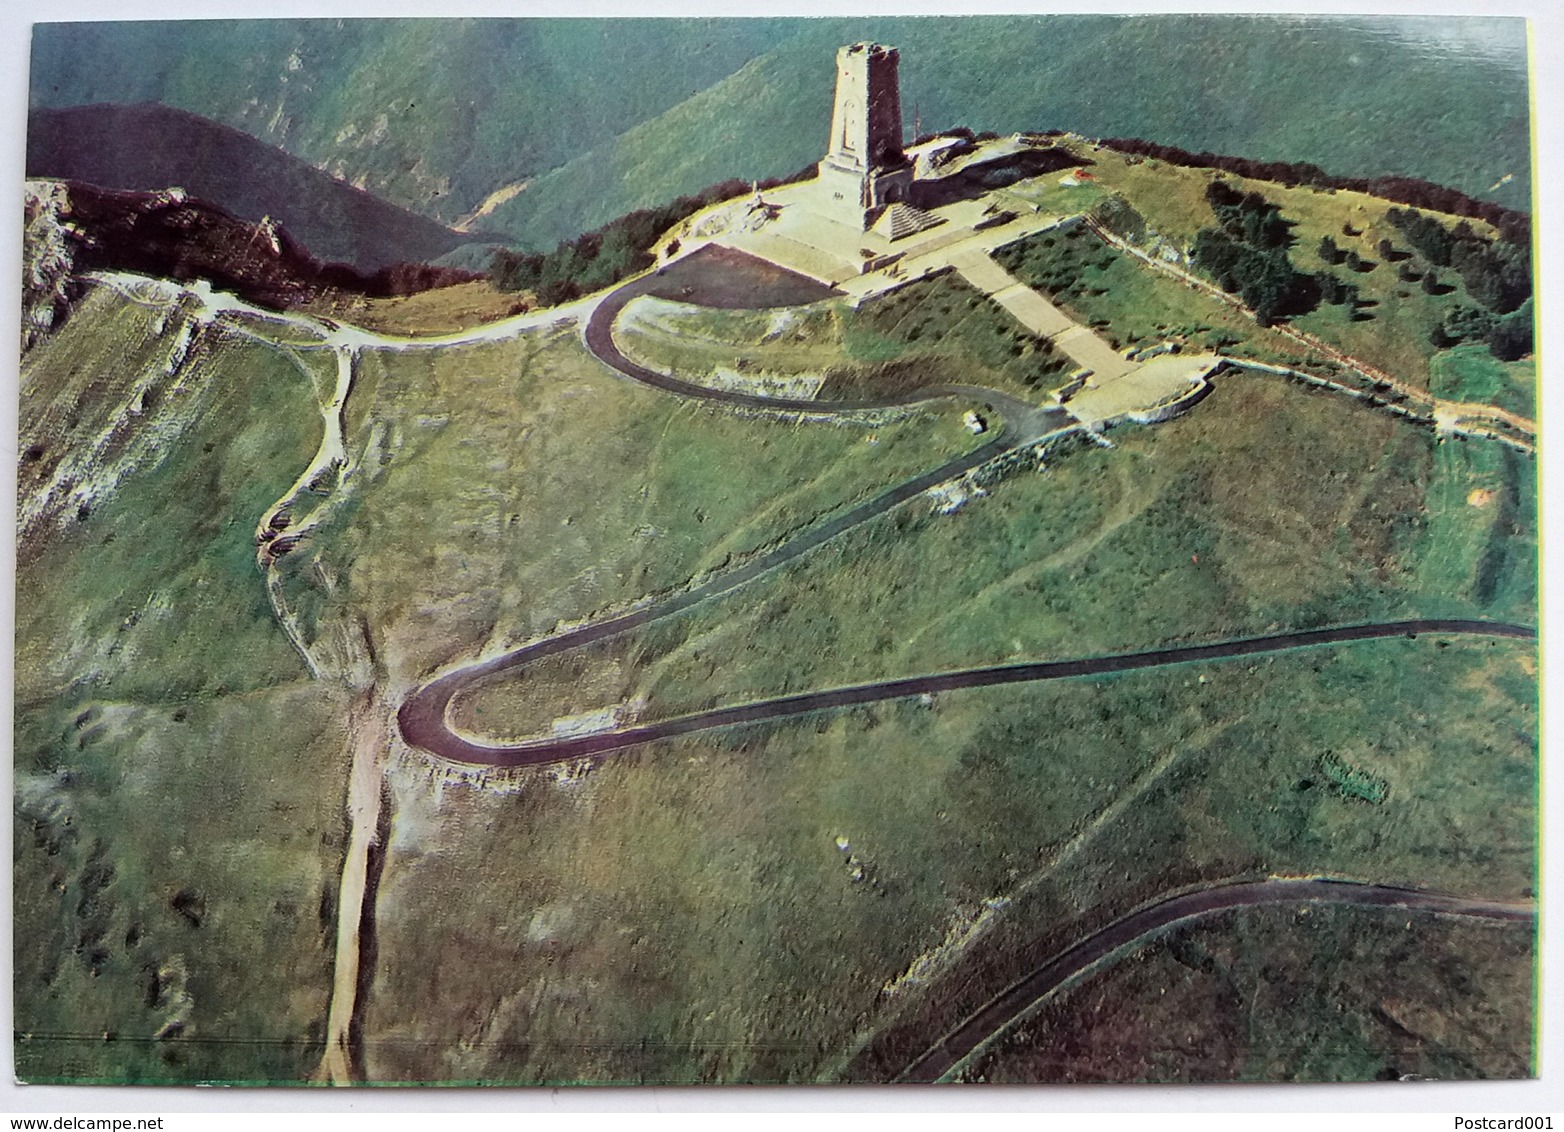 #703  Air View Of Monument To Liberty ''Shipka'' Russian-Turkish War - BULGARIA - Postcard  1970's - Monuments